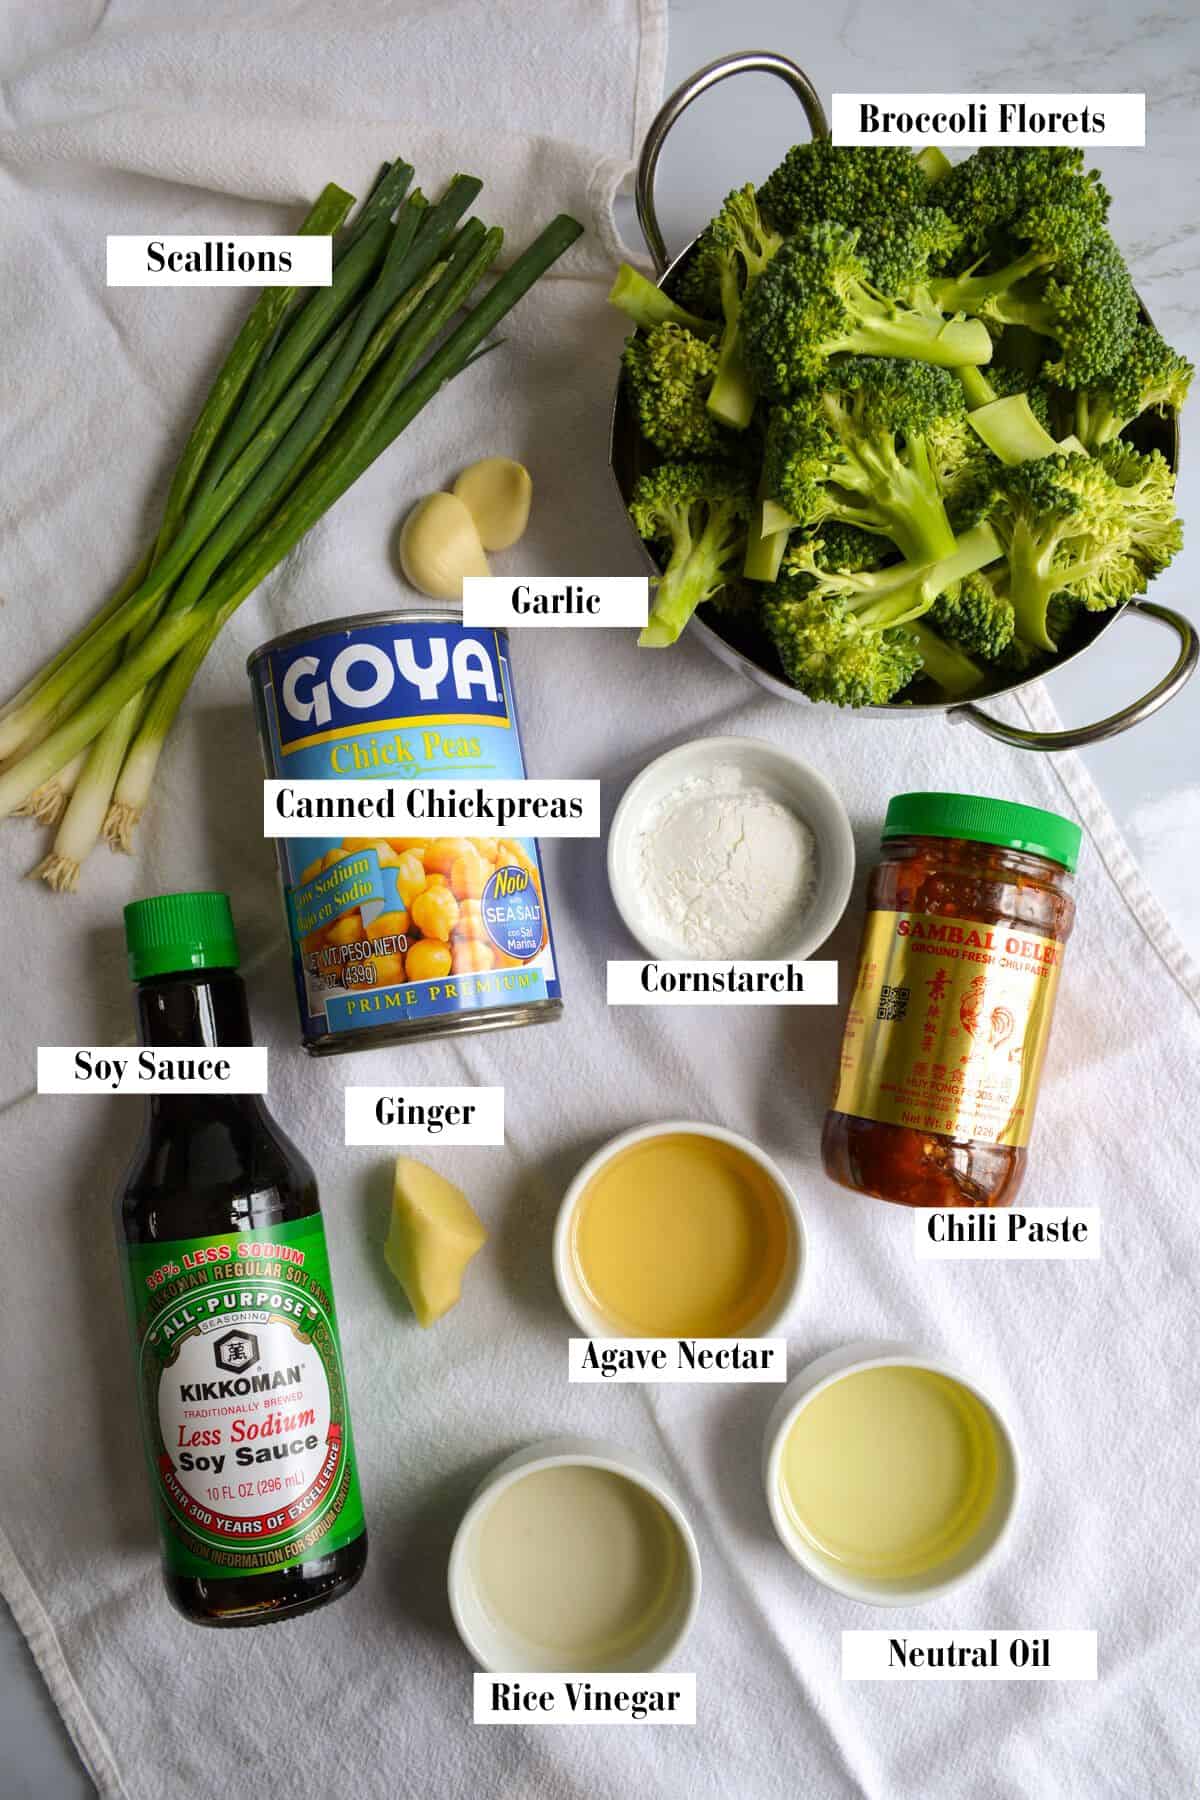 Ingredients for this recipe in small bowls on a cloth.